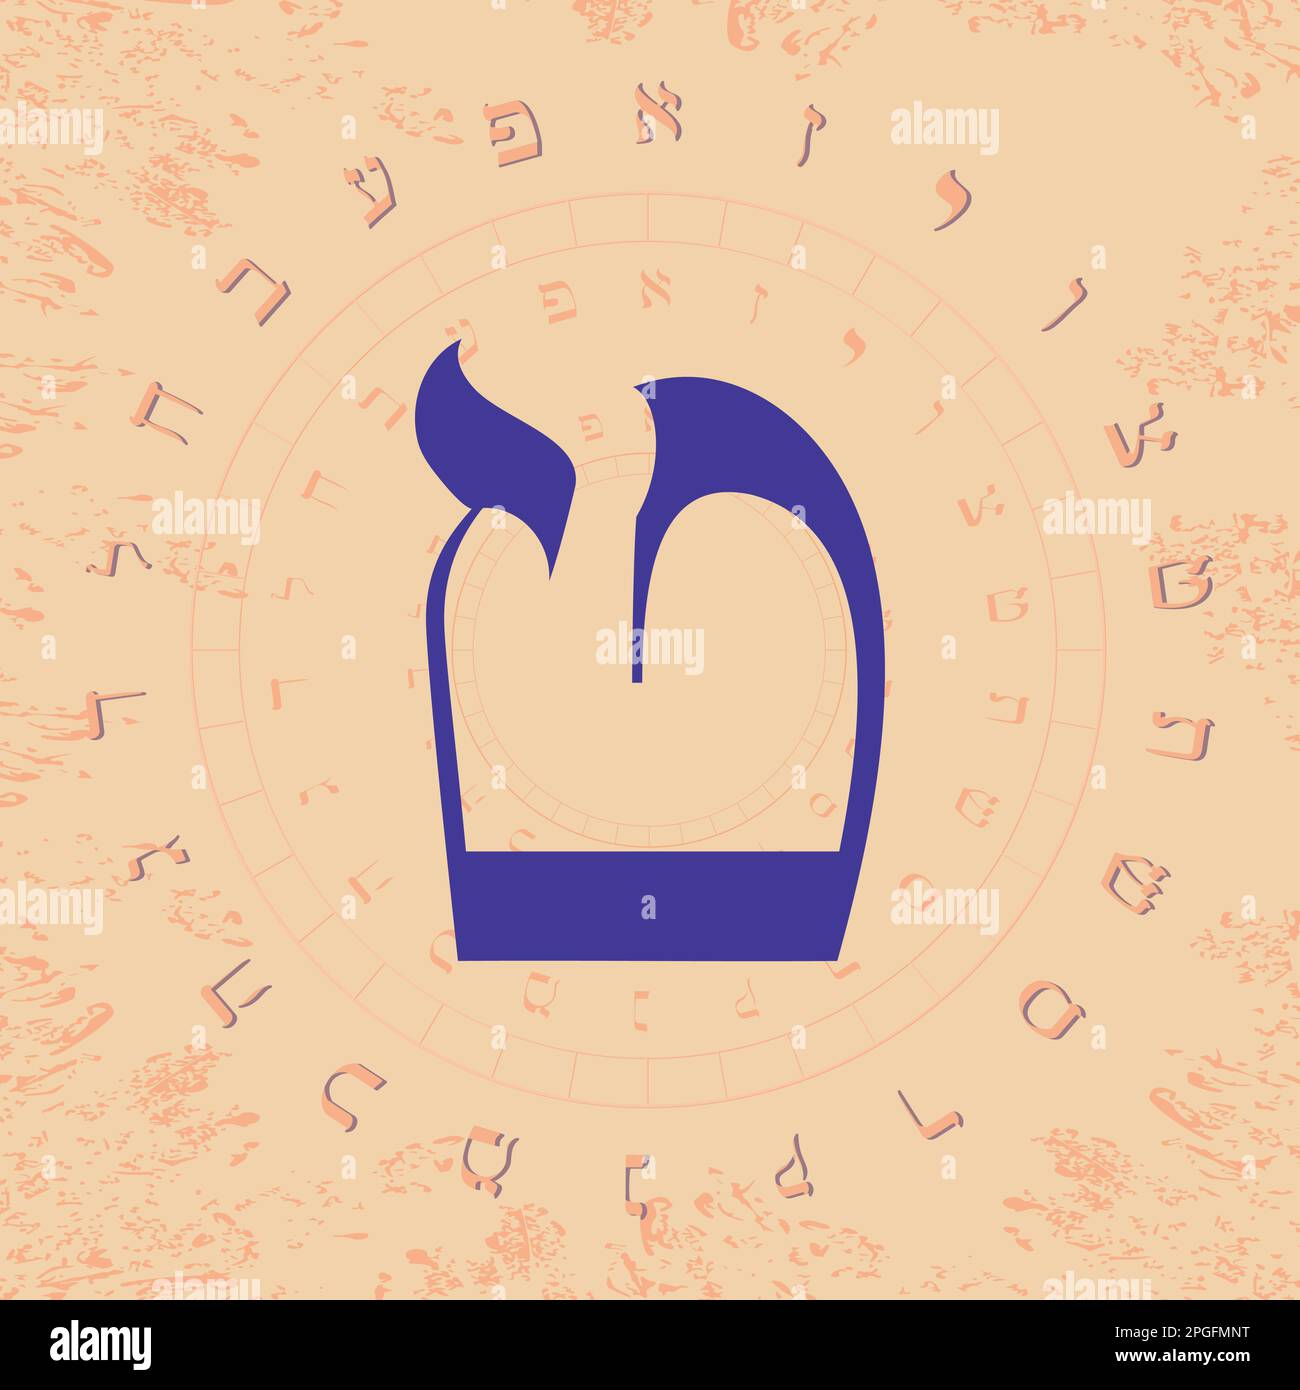 Vector illustration of the Hebrew alphabet in circular design. Hebrew letter called Teth large and blue. Stock Vector